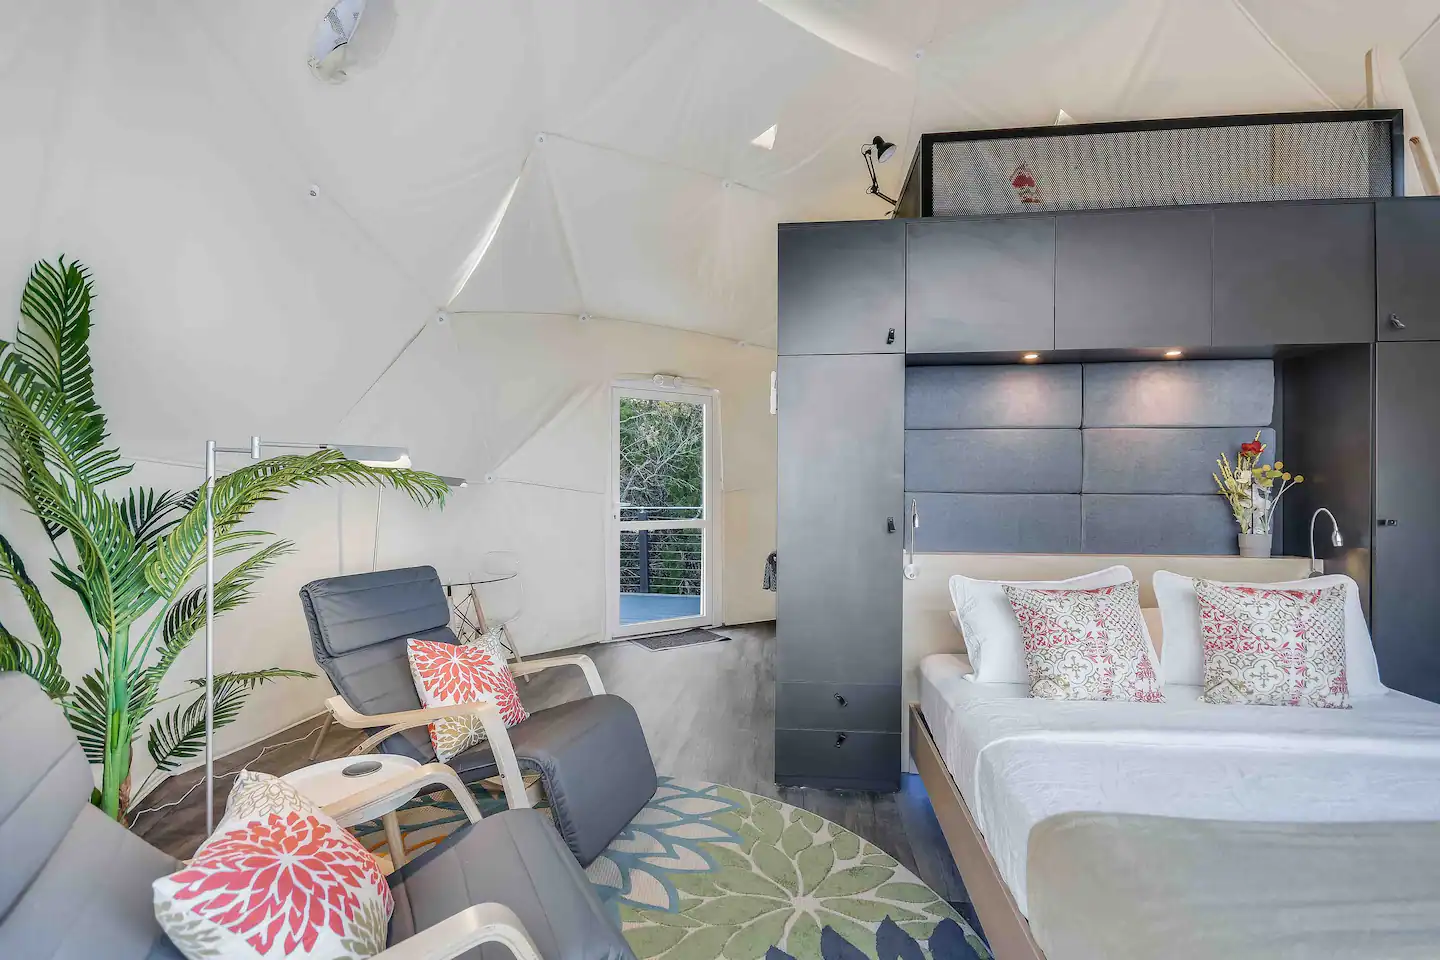 The main floor is unusually outfitted with a "floating" queen-size bed.